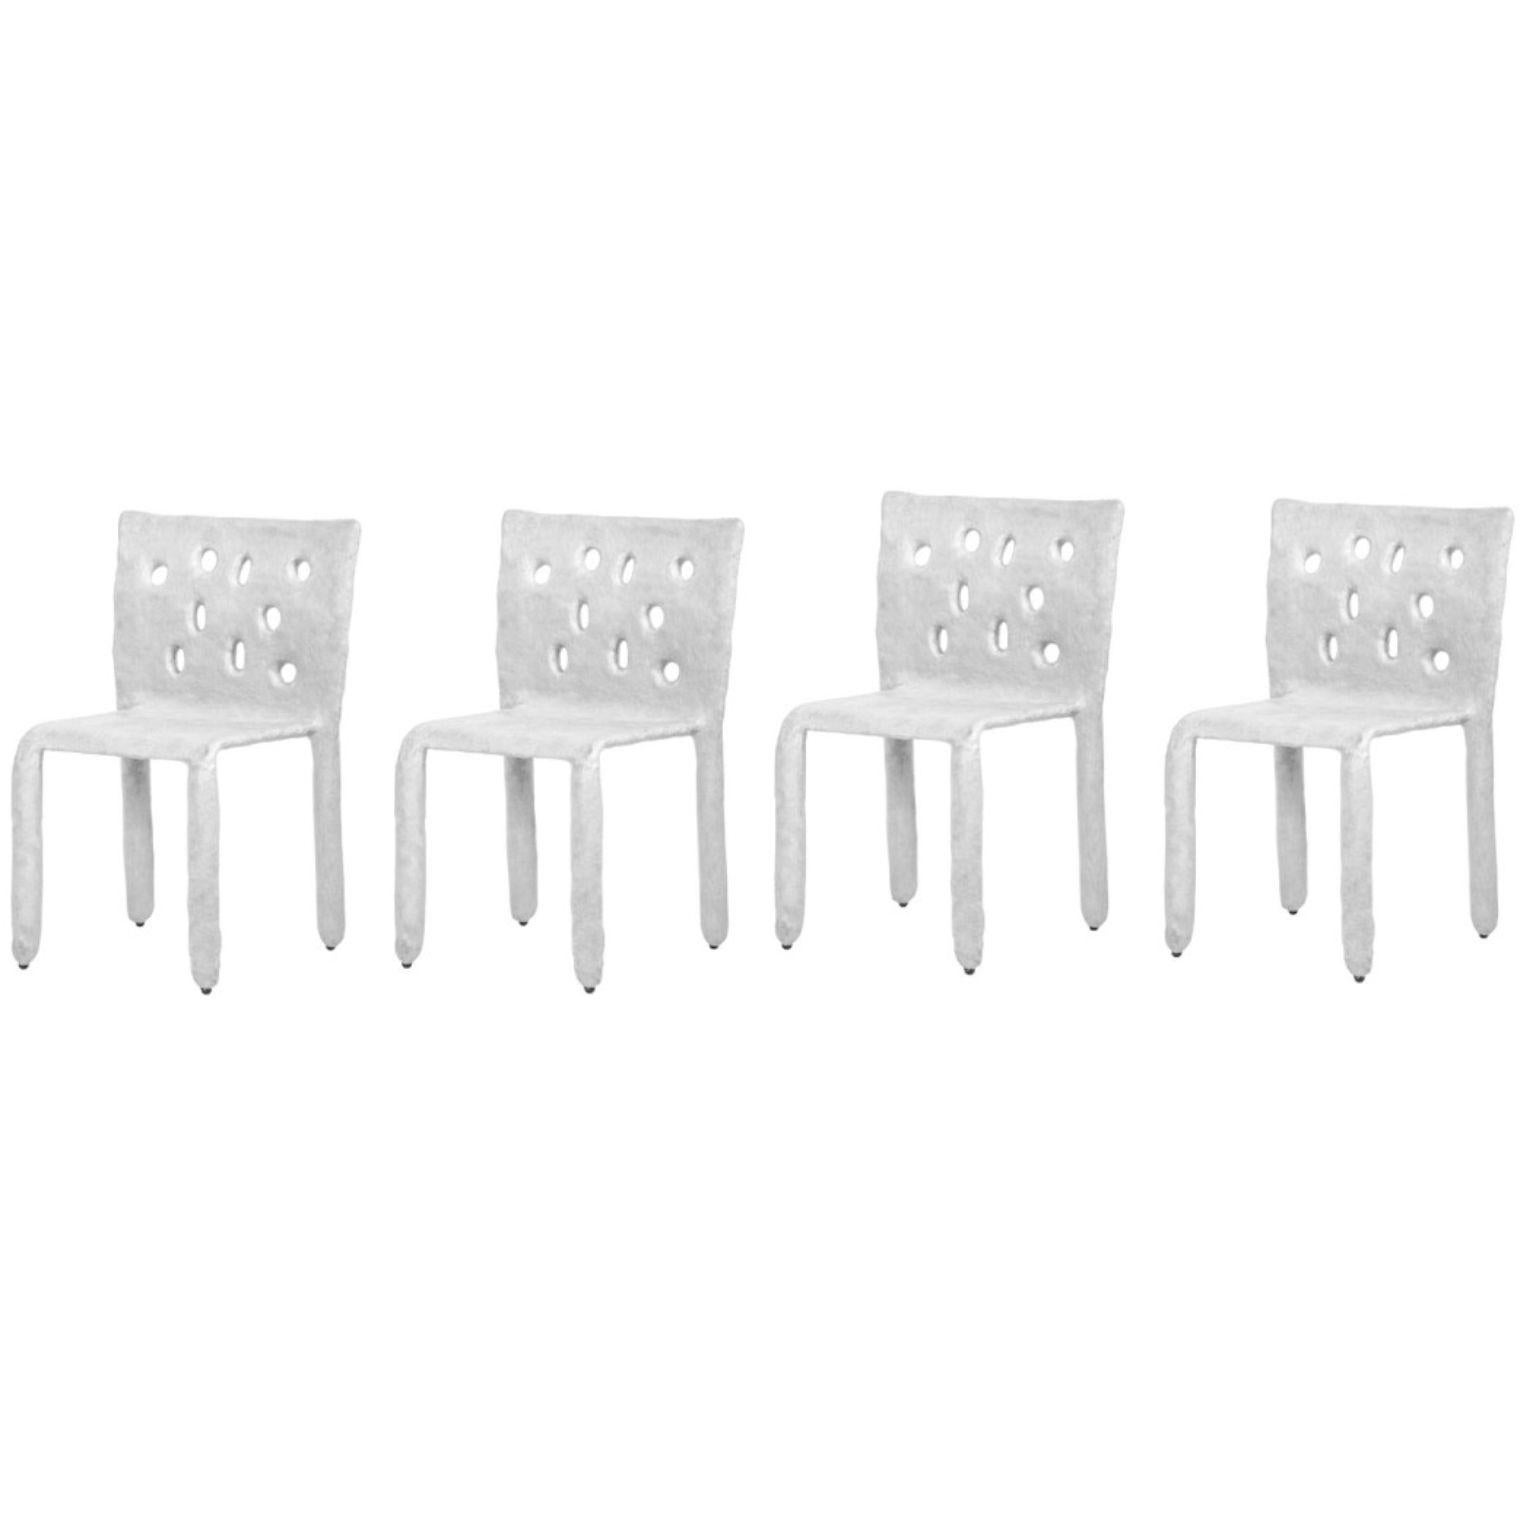 Set of 4 White Sculpted Contemporary Chairs by FAINA
Design: Victoriya Yakusha
Material: steel, flax rubber, biopolymer, cellulose
Dimensions: Height 82 x width 54 x legs depth 45 cm
 Weight: 15 kilos.

Made in the style of ethnic minimalism,